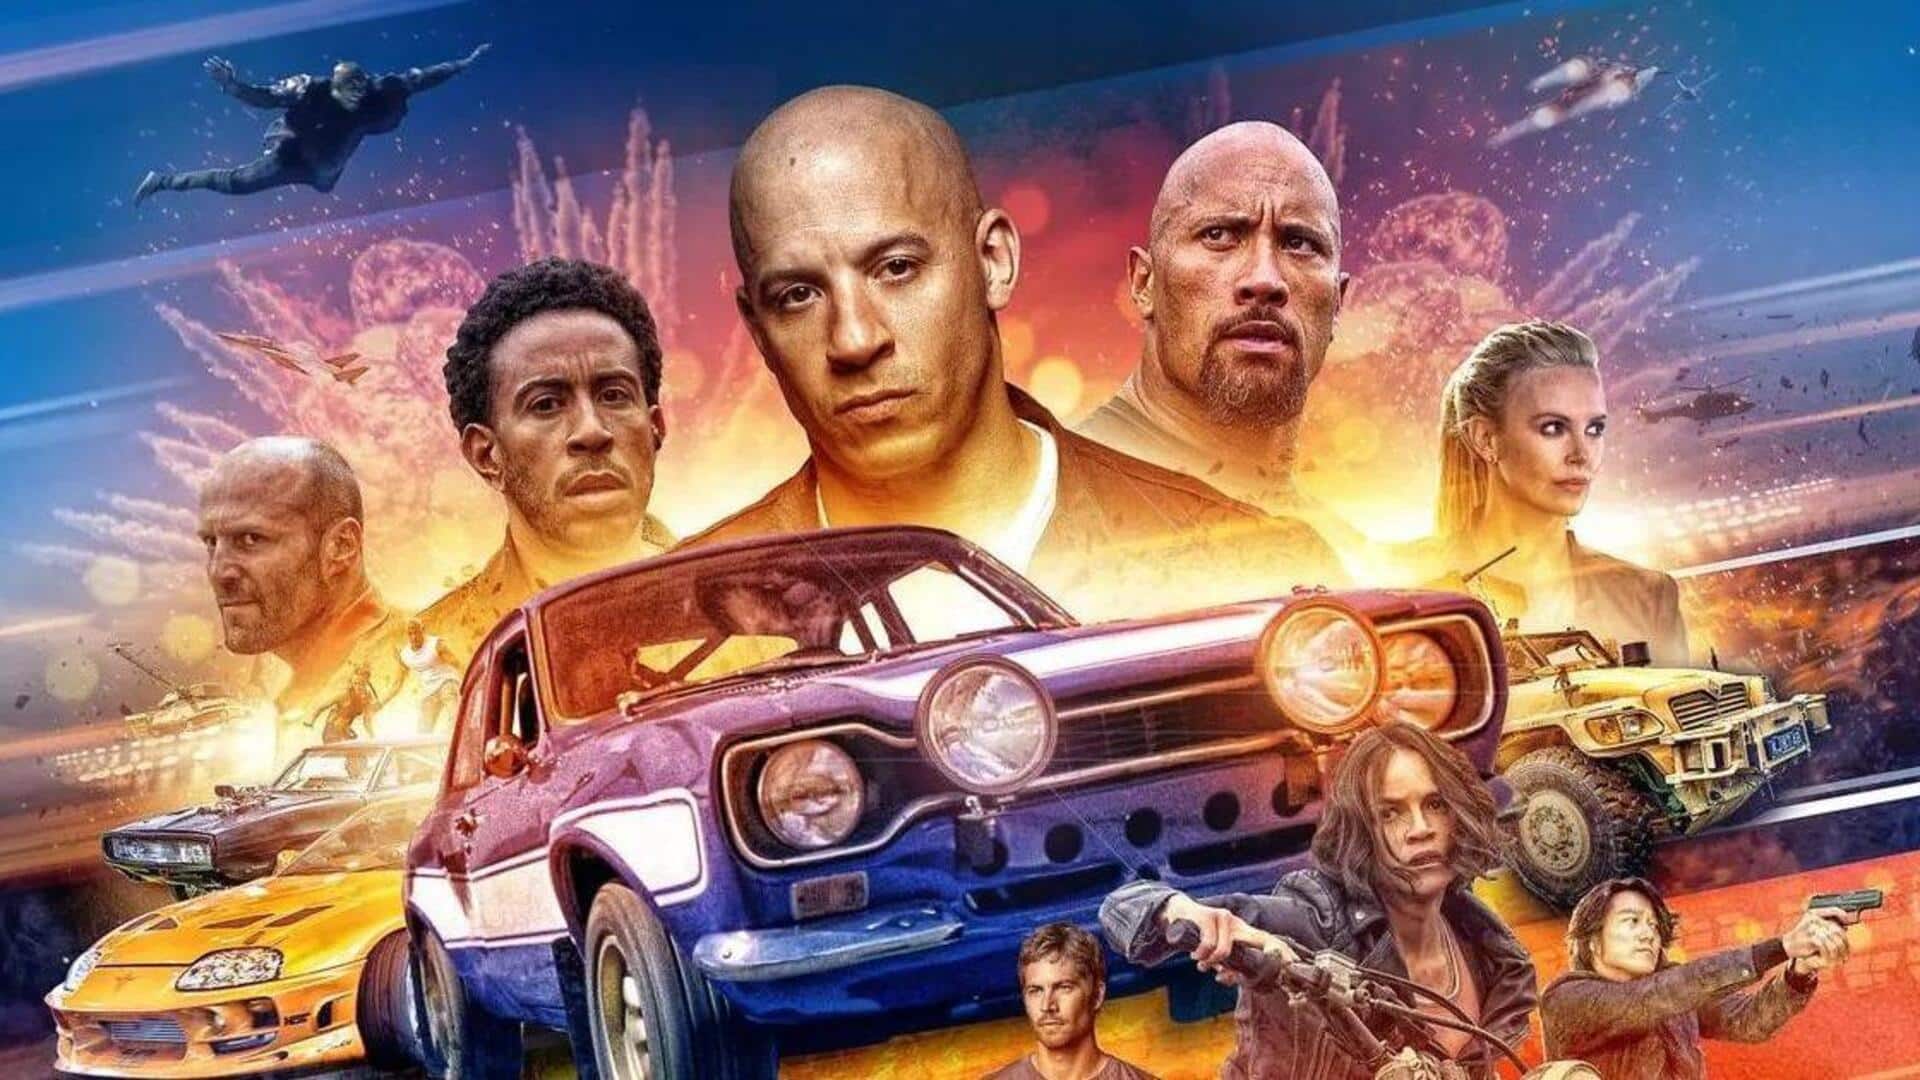 'Fast & Furious' franchise coming to end: Vin Diesel 